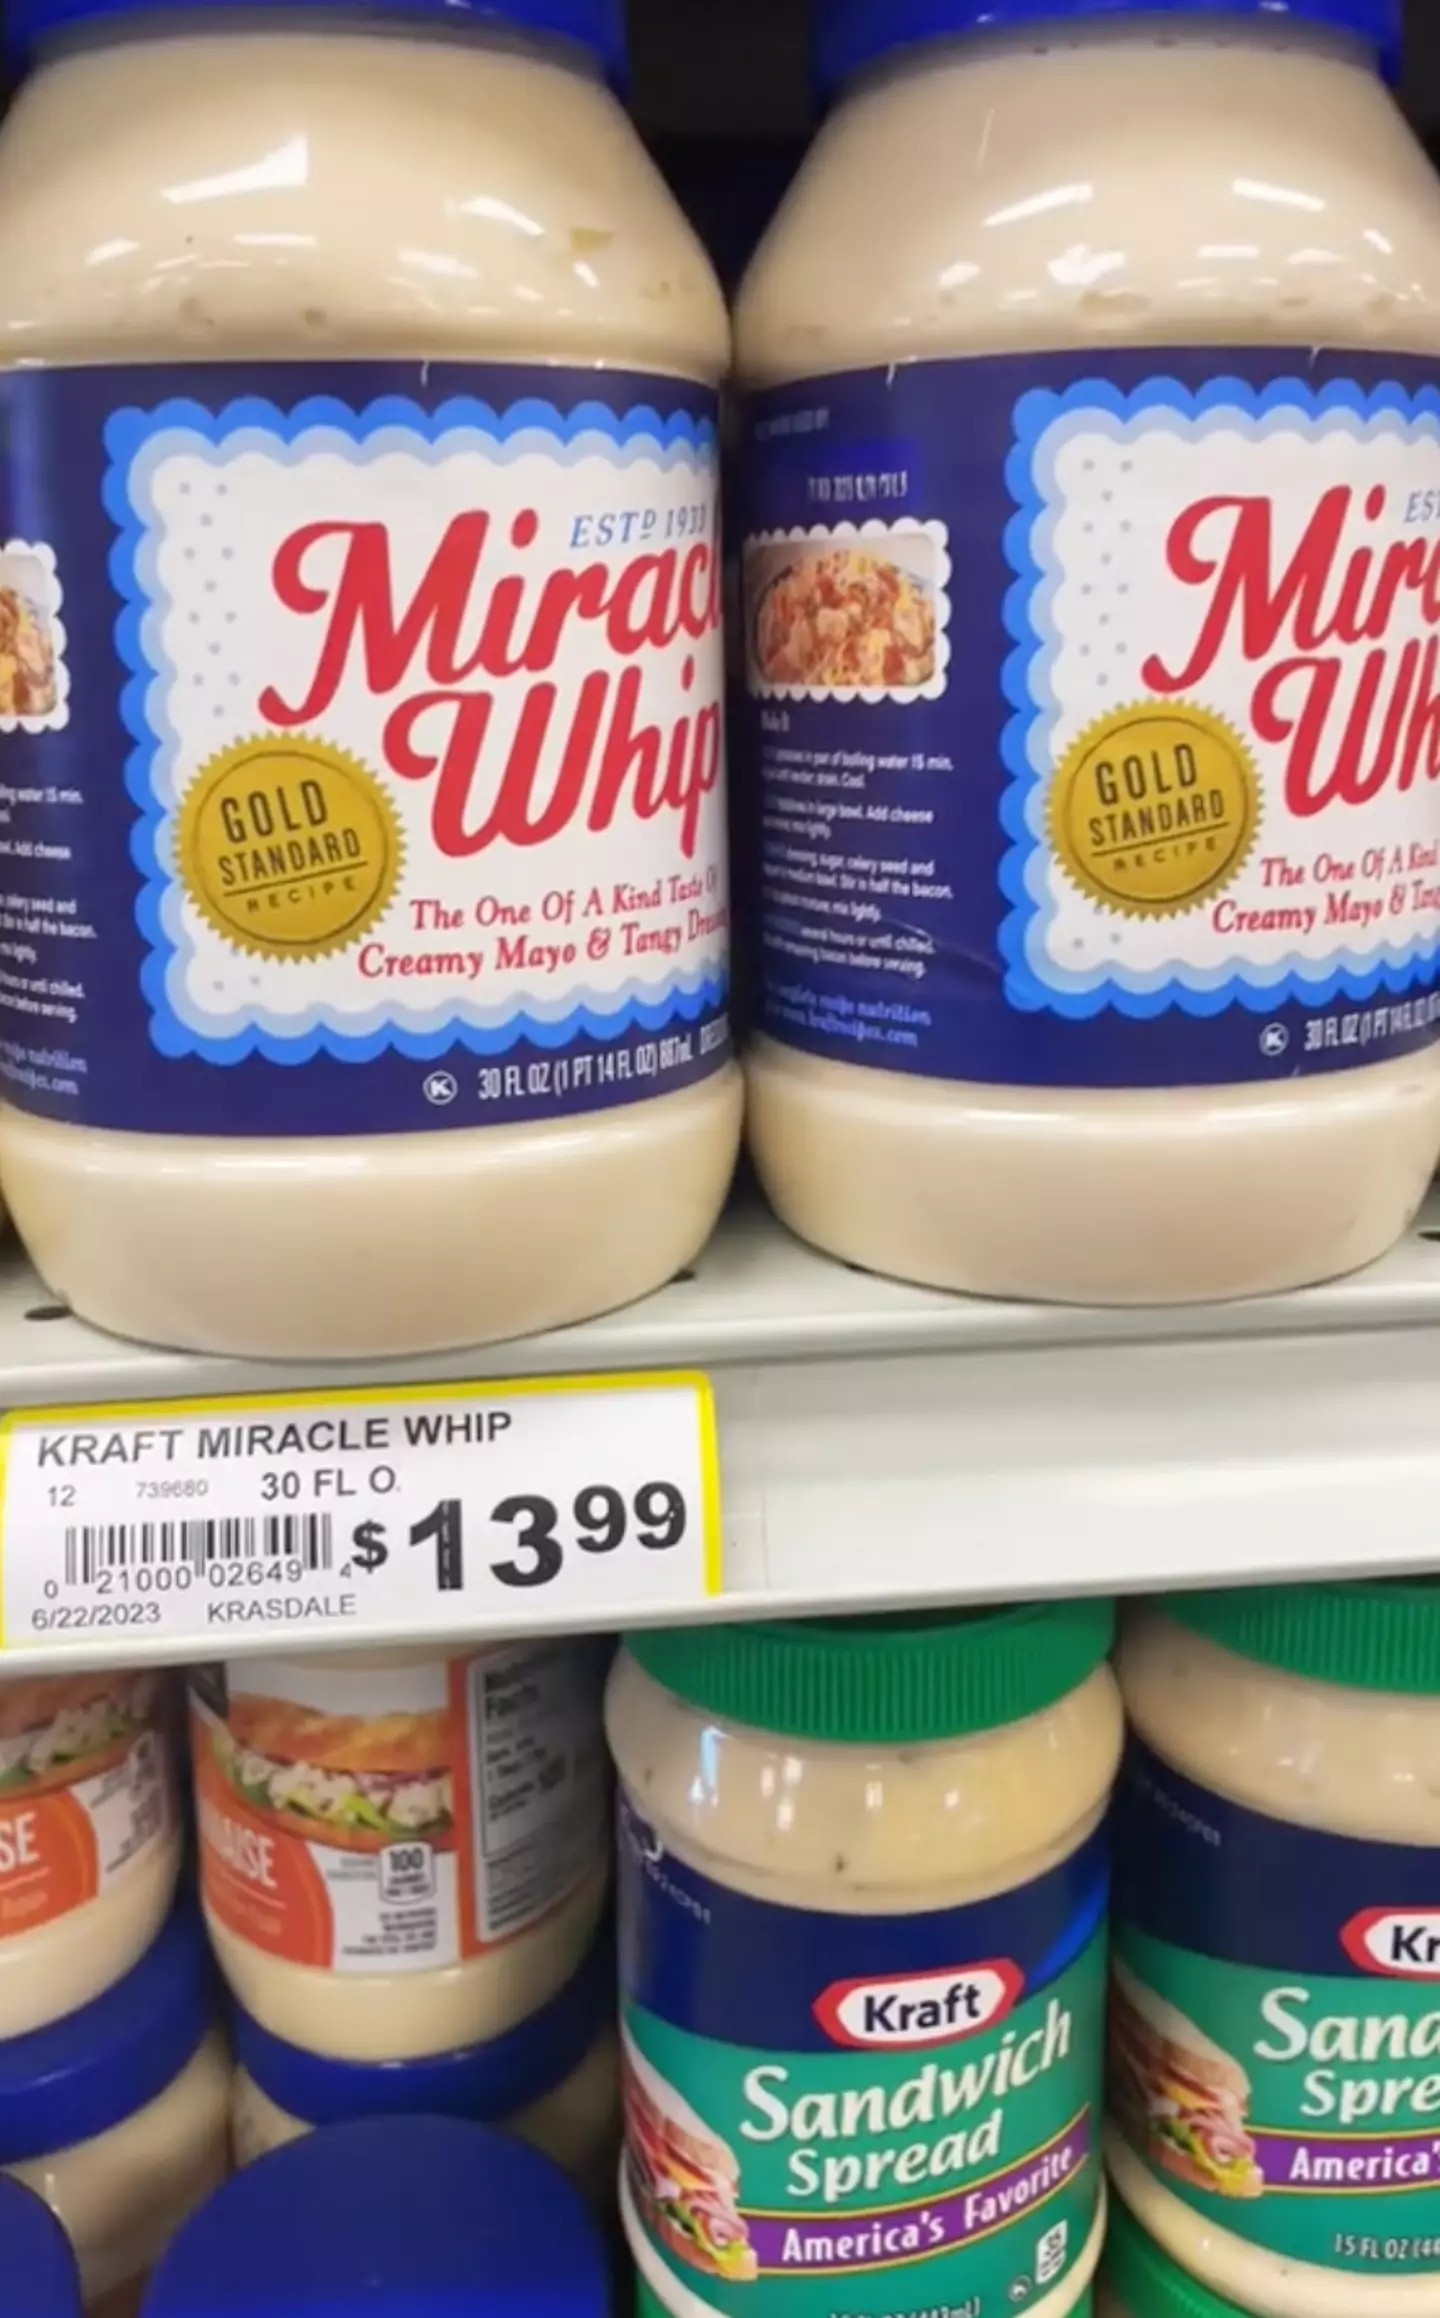 One simple jar of Miracle Whip mayonnaise was priced at $13.99. Ouch.